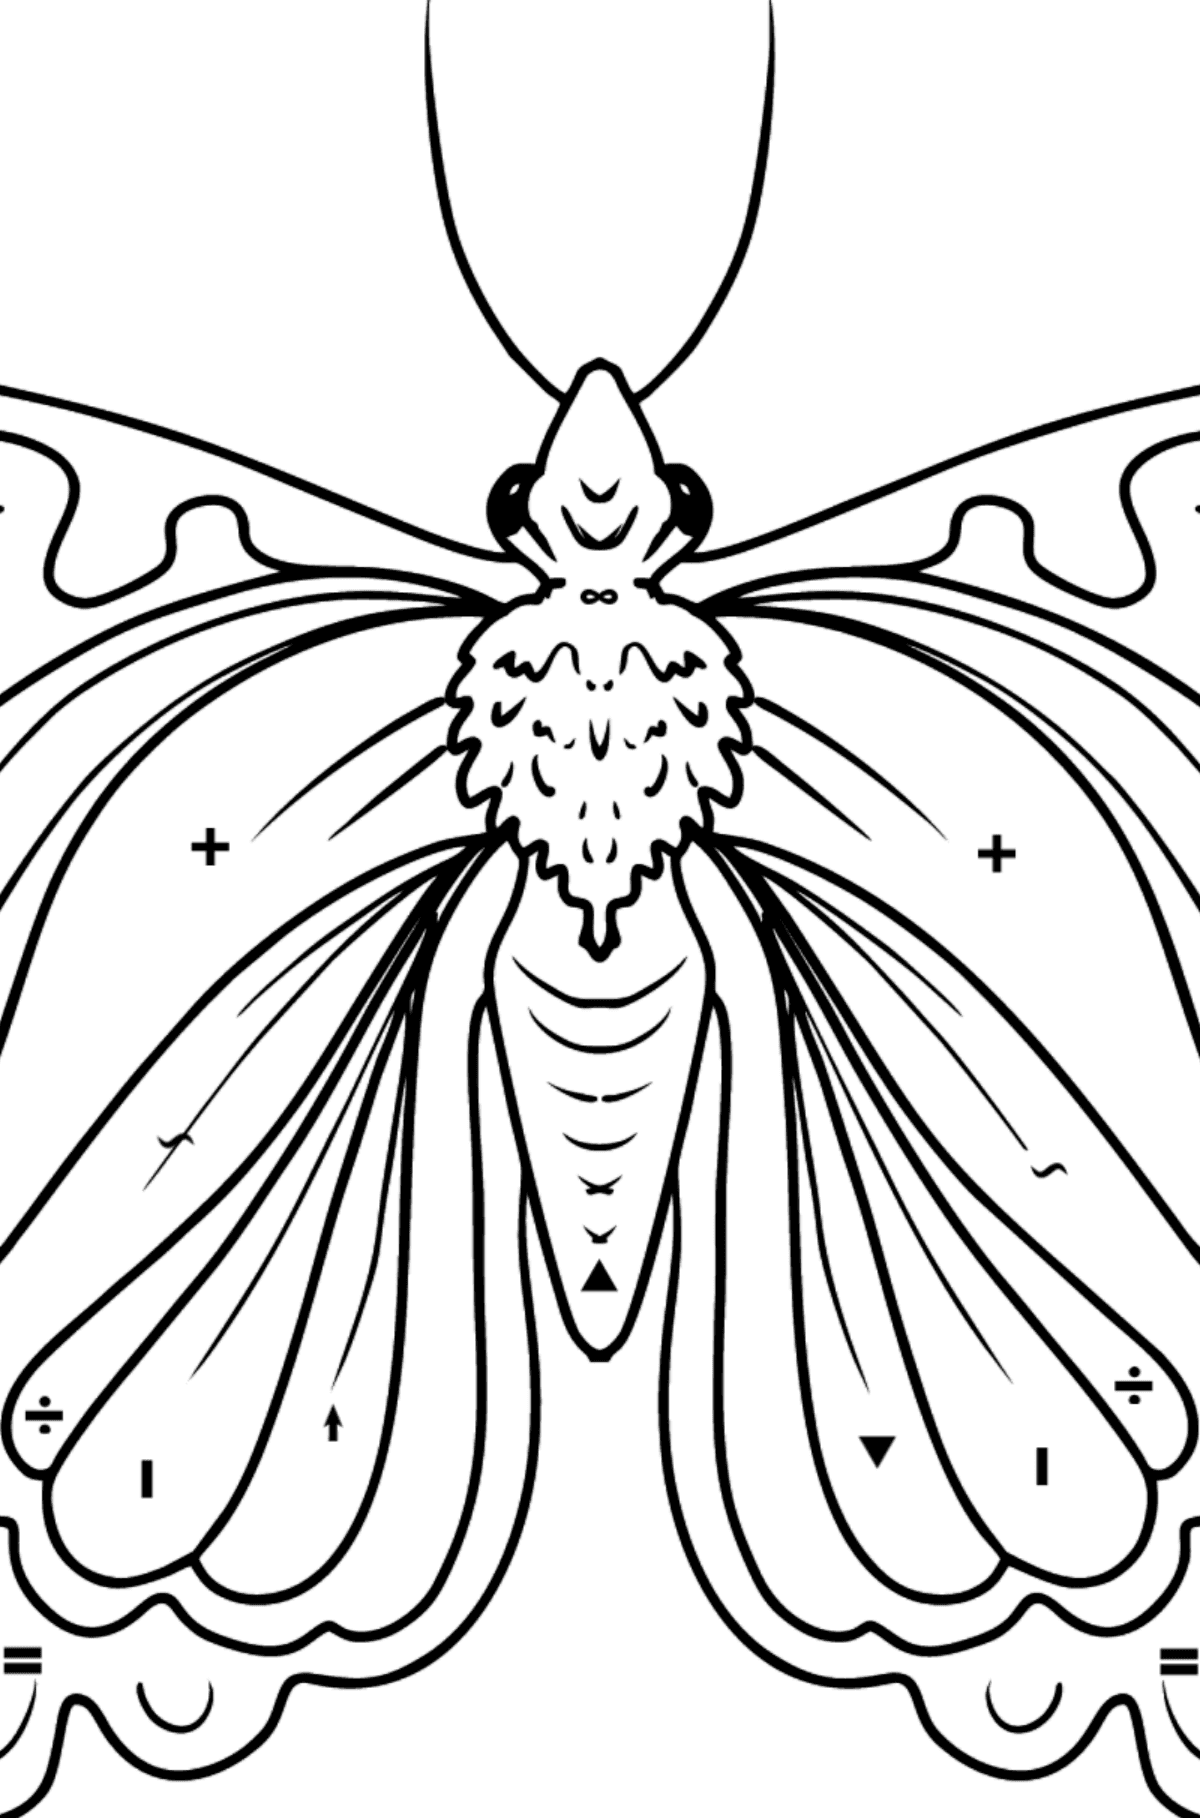 Cute Butterfly coloring page - Coloring by Symbols for Kids